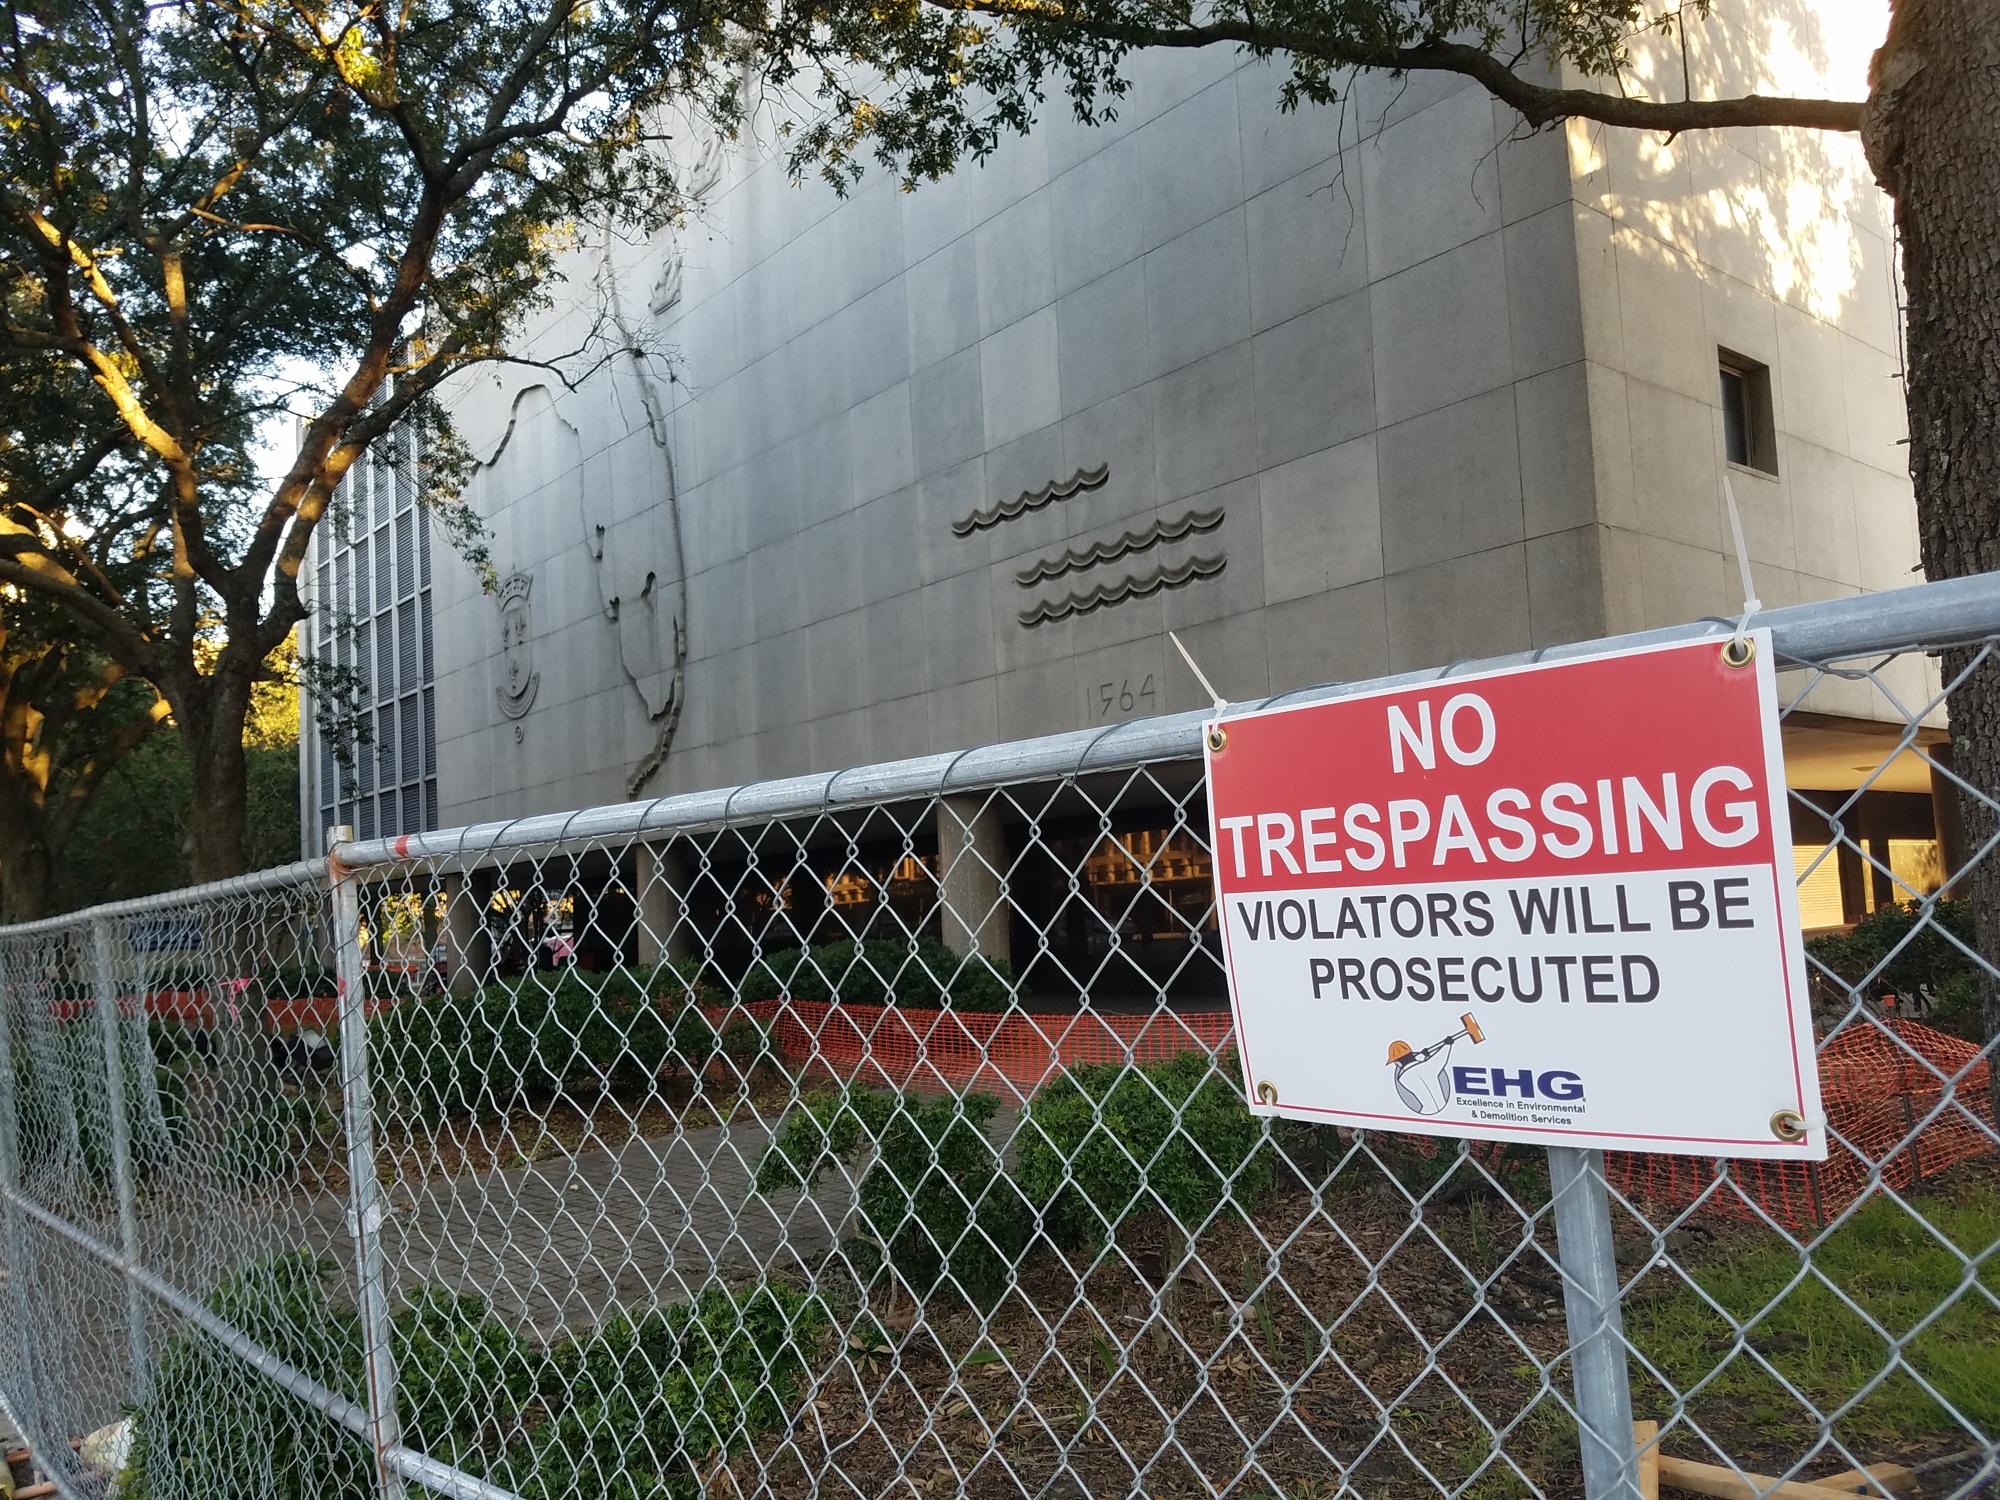 Work is underway on the demolition of the old City Hall Annex and former Duval County Courthouse on Bay Street, with the area fenced off.